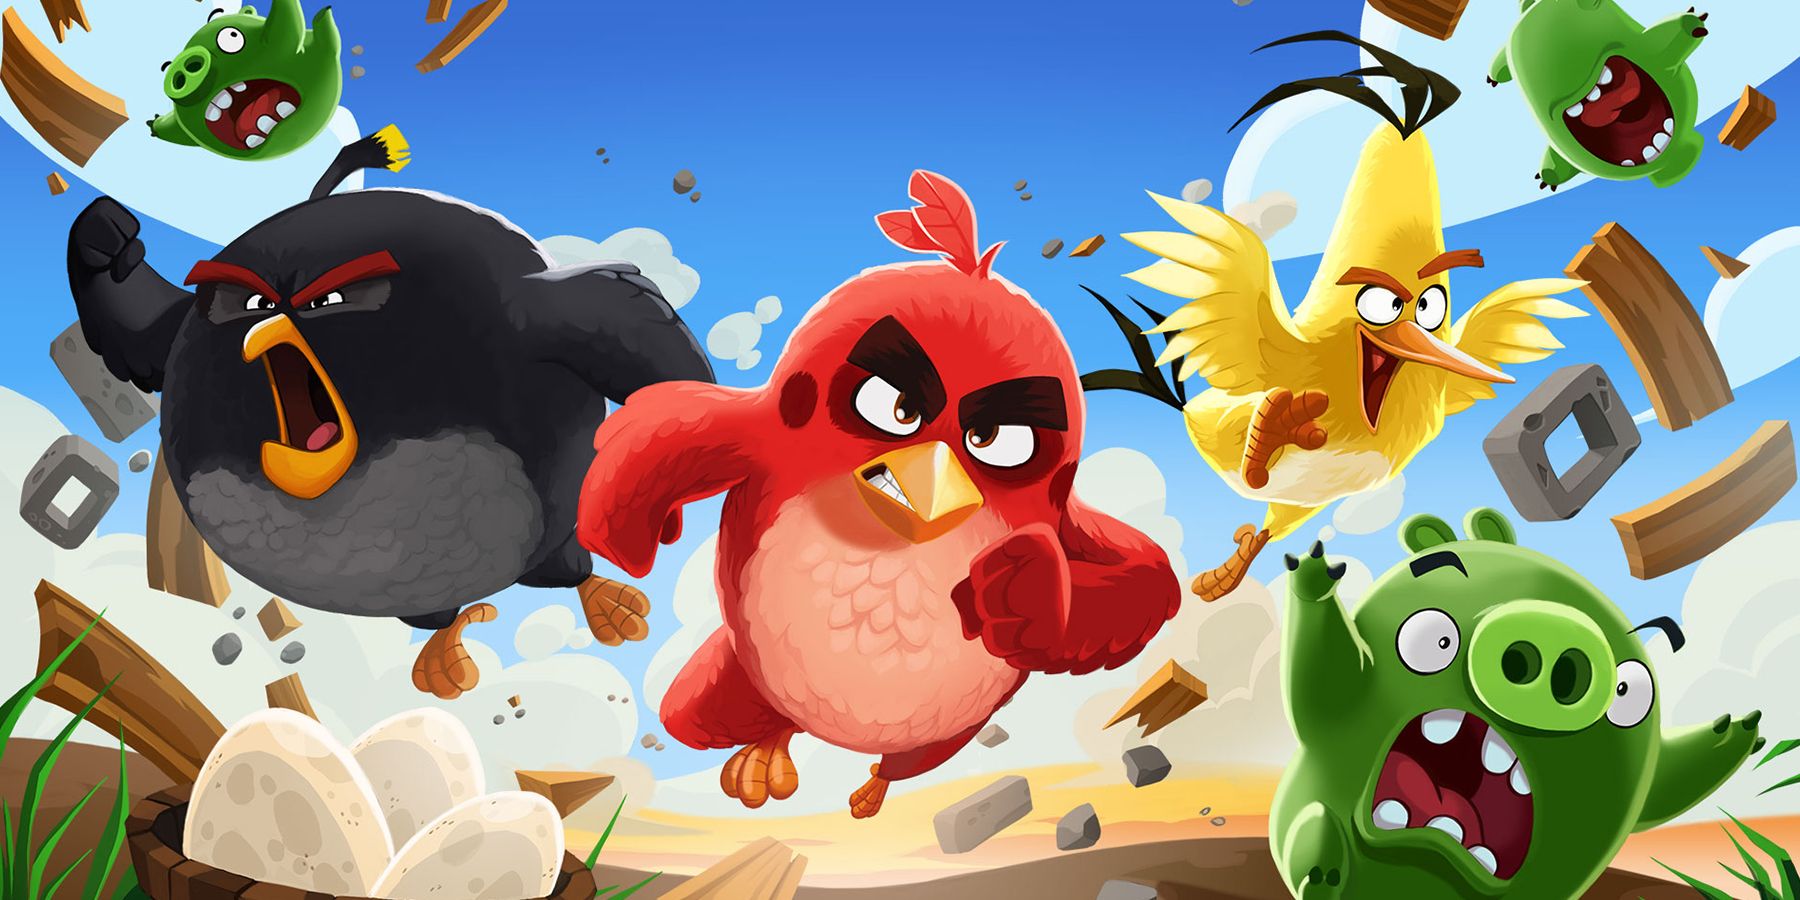 Angry Birds, promotional art from update based on movie